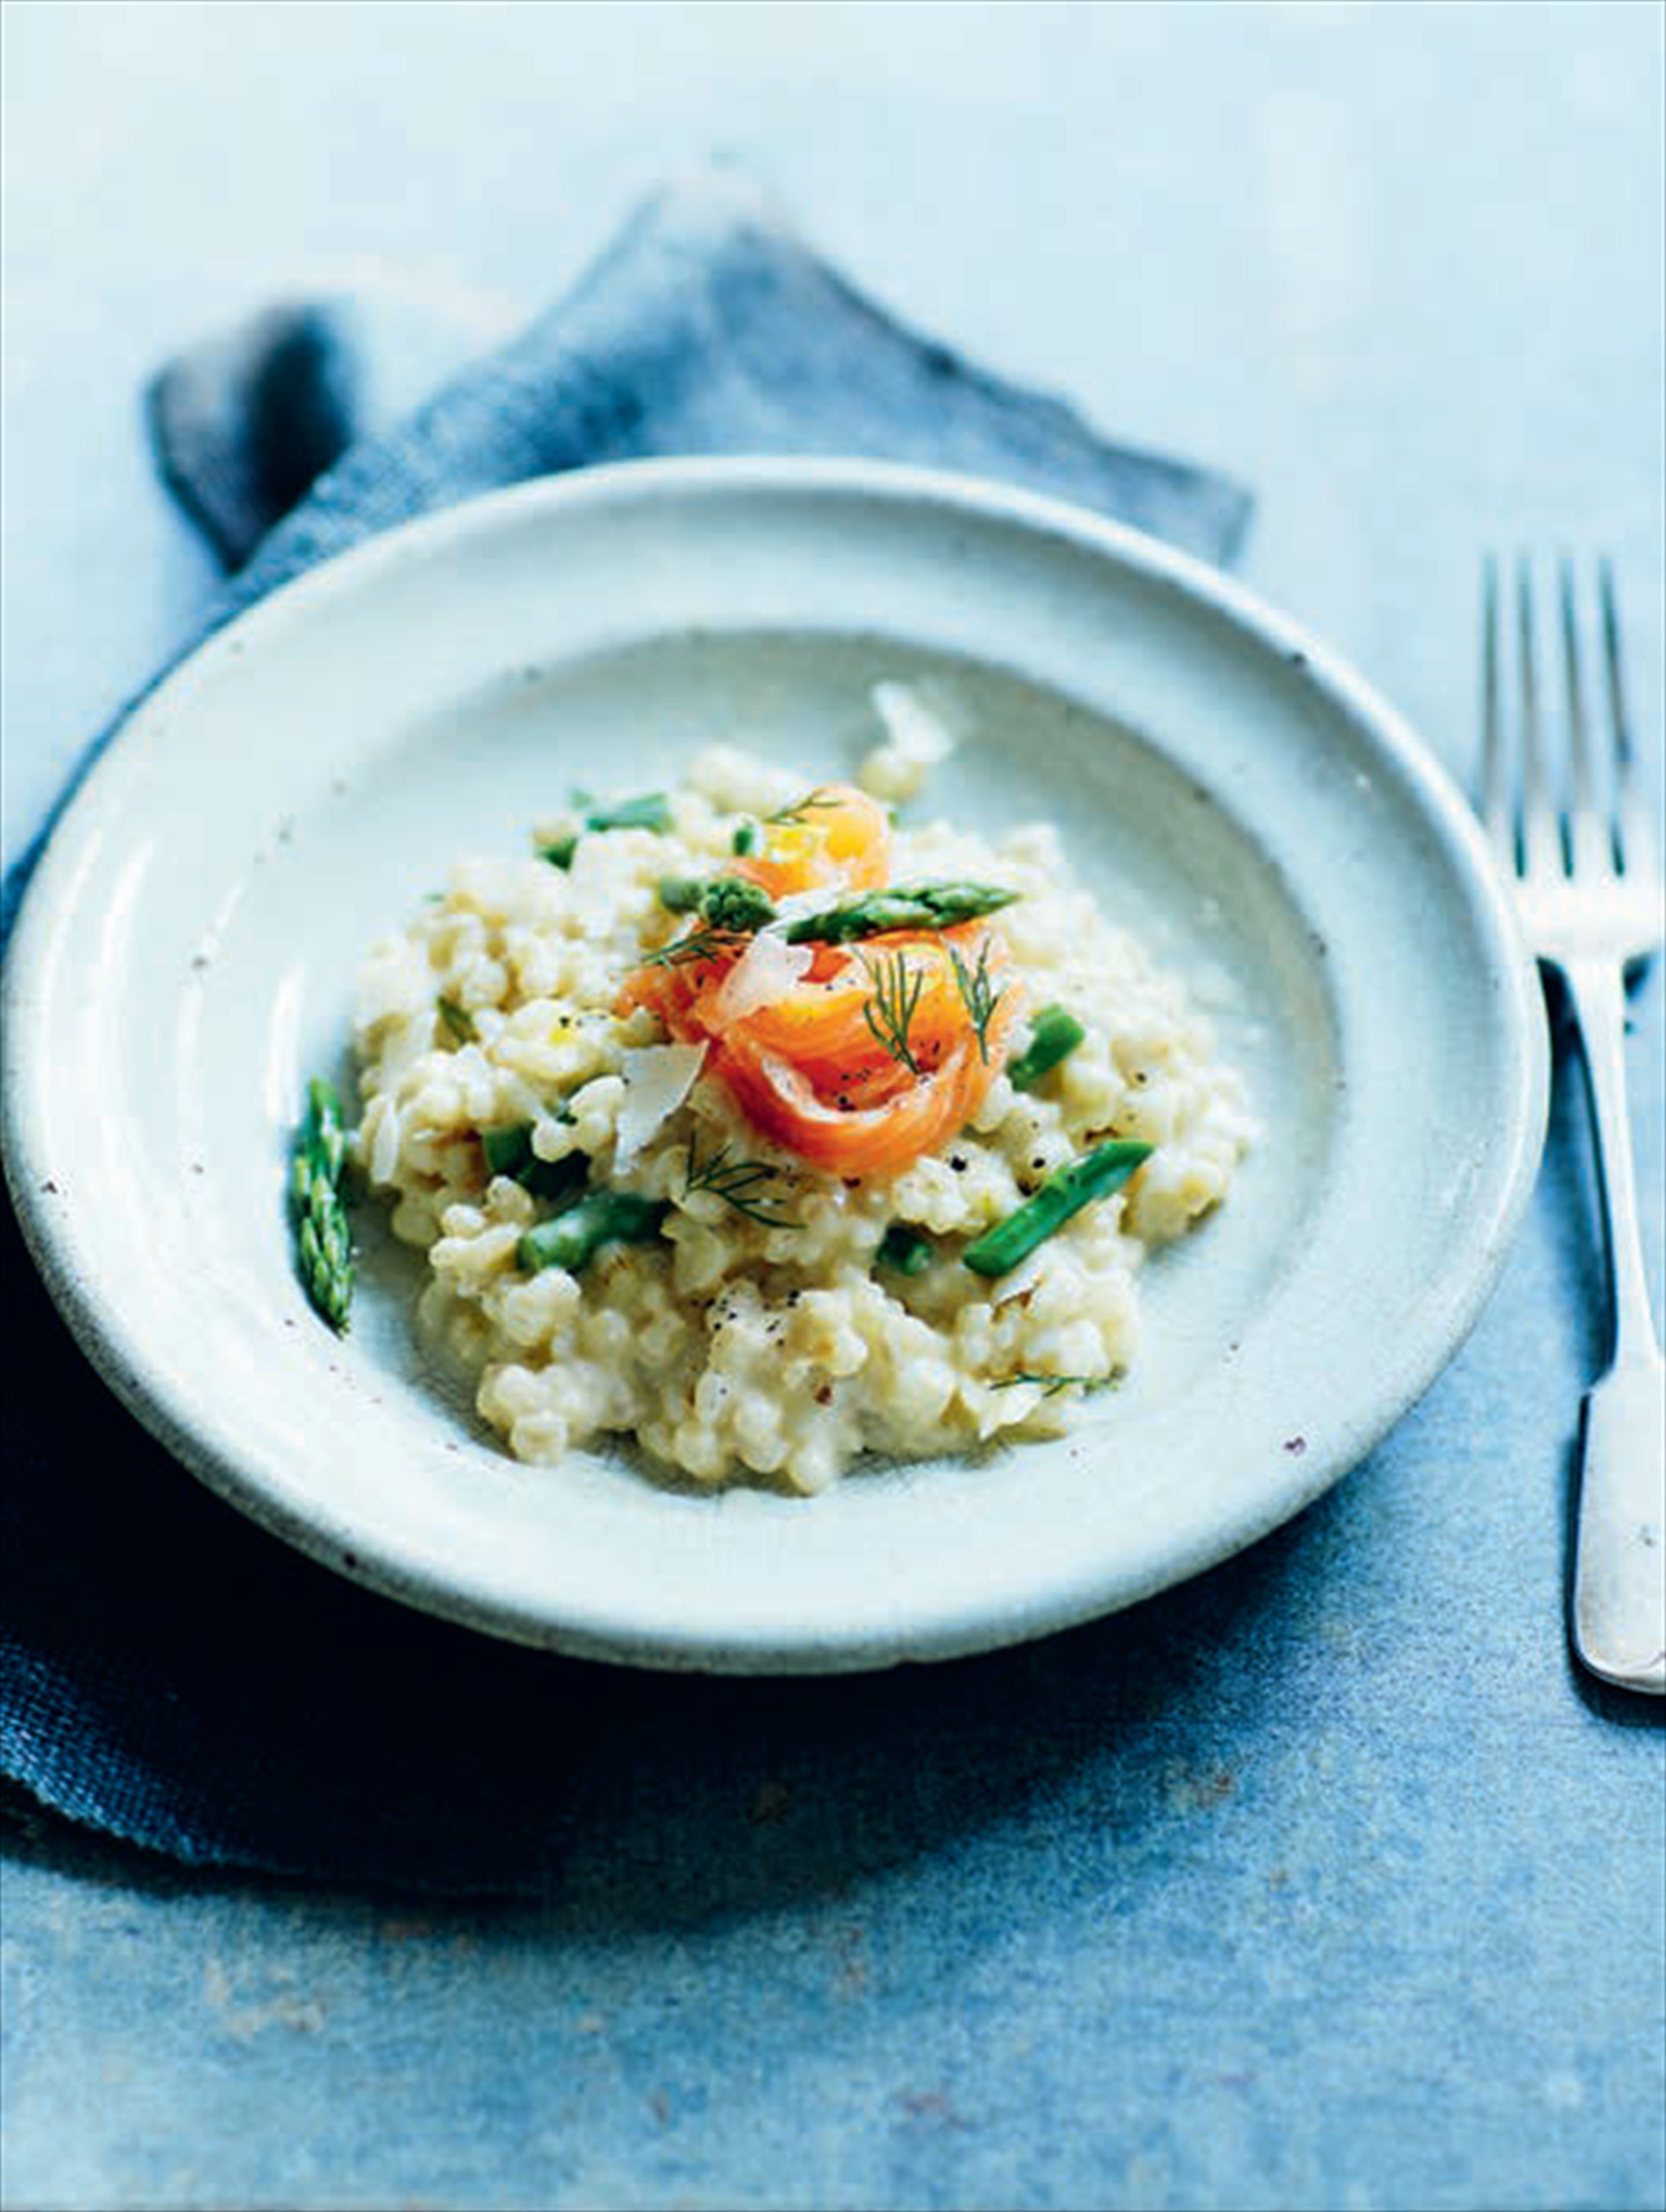 Creamy pearl barley risotto with smoked garlic, asparagus & quick cured salmon